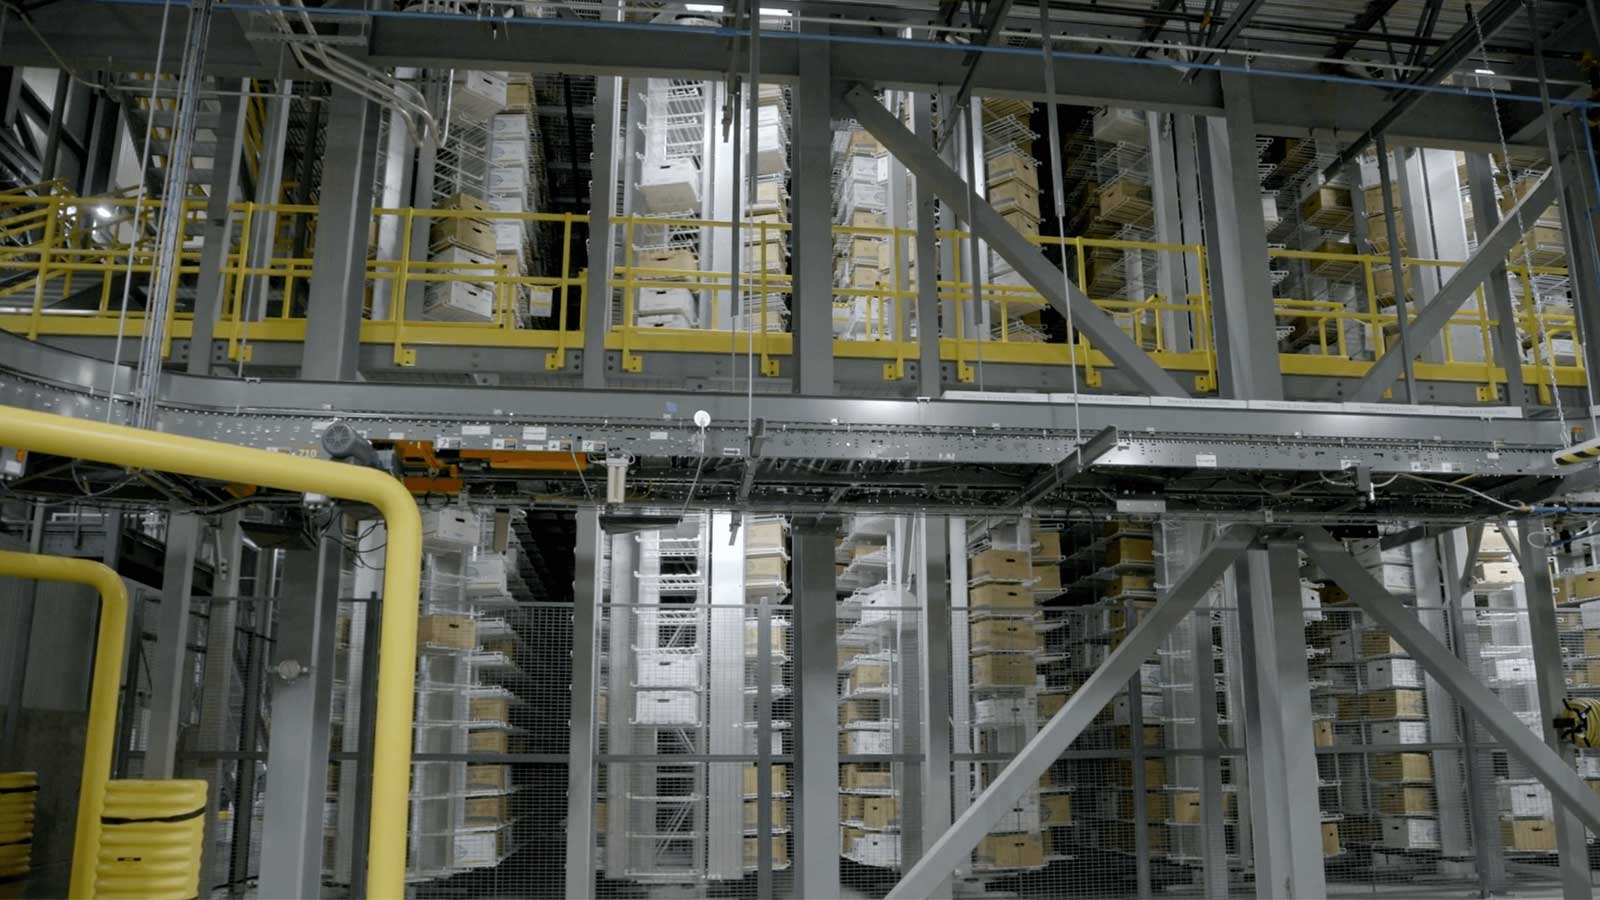 View of automated storage and retrieval system and conveyor in a meat distribution center.